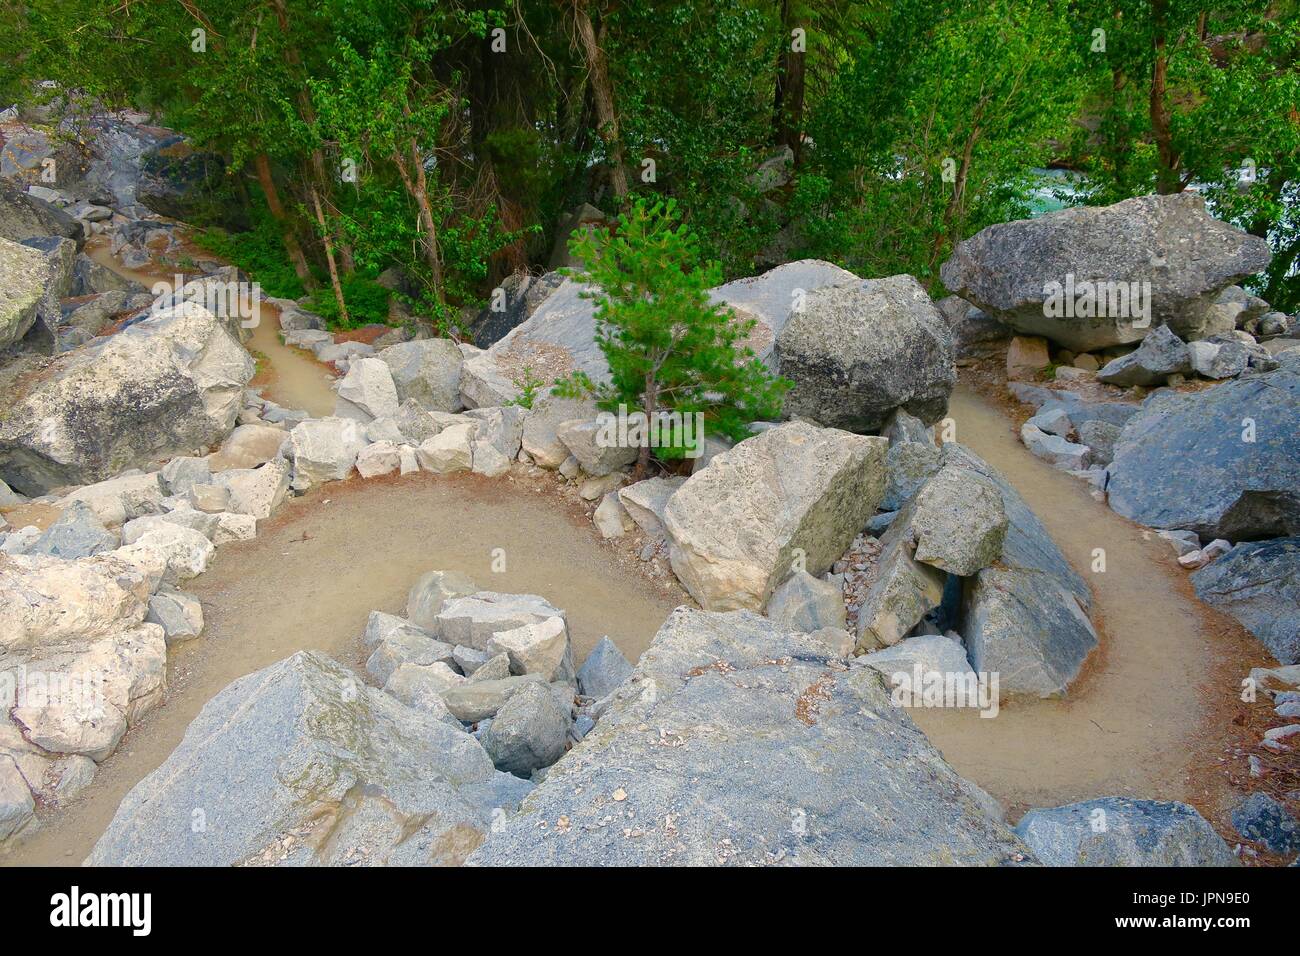 Serpentine path winding through boulders along the King's River, King's Canyon National Park, California, United States Stock Photo